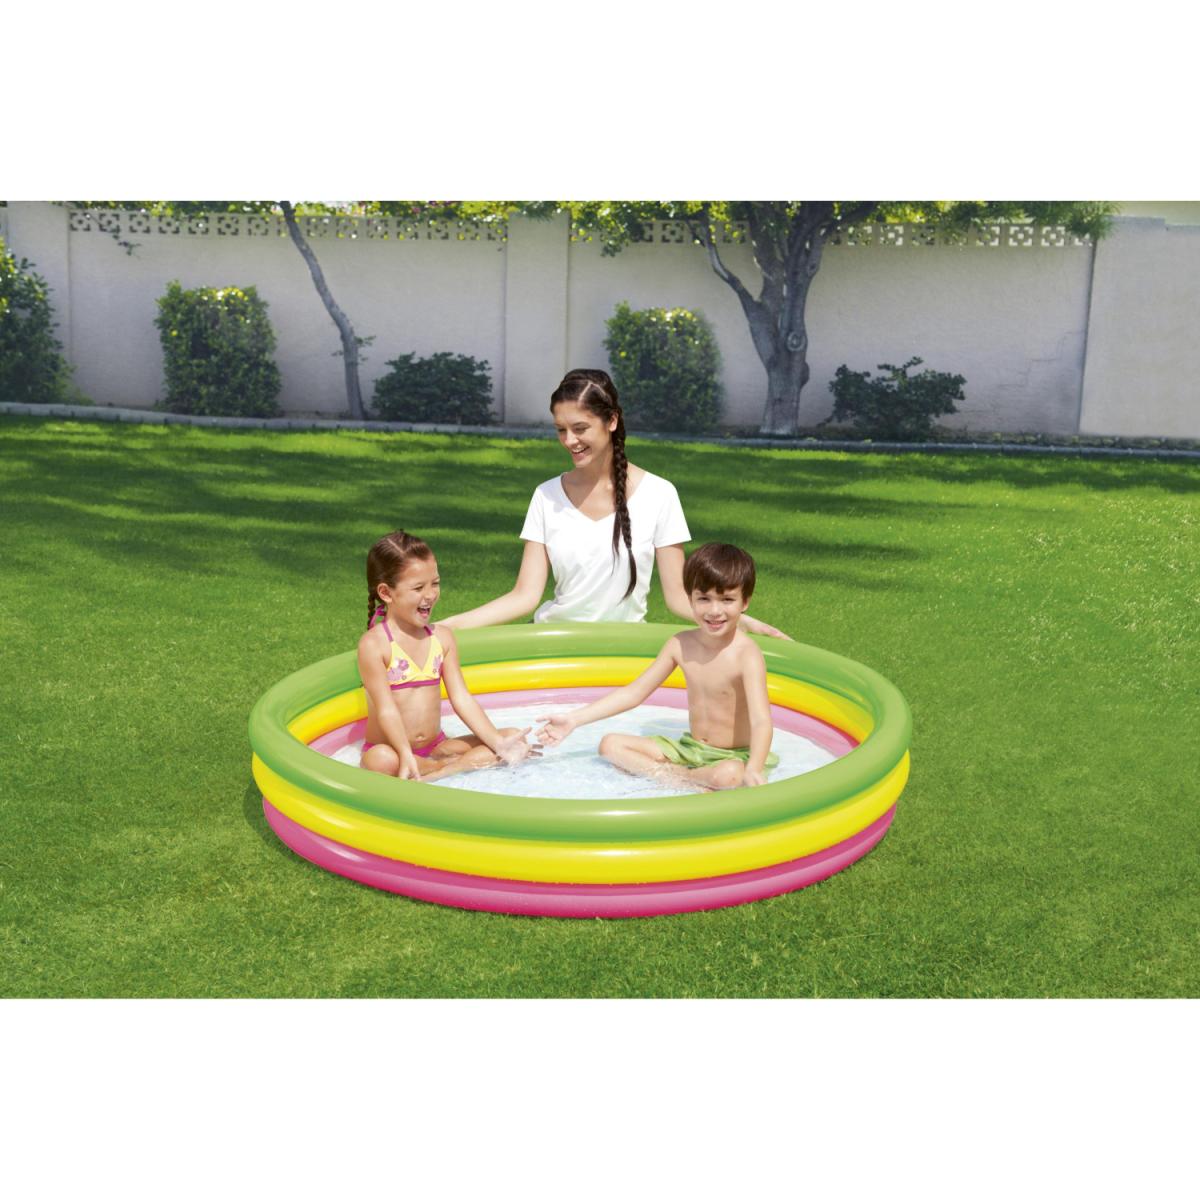 PISCINA INFLABLE 3 RINES 60X12"